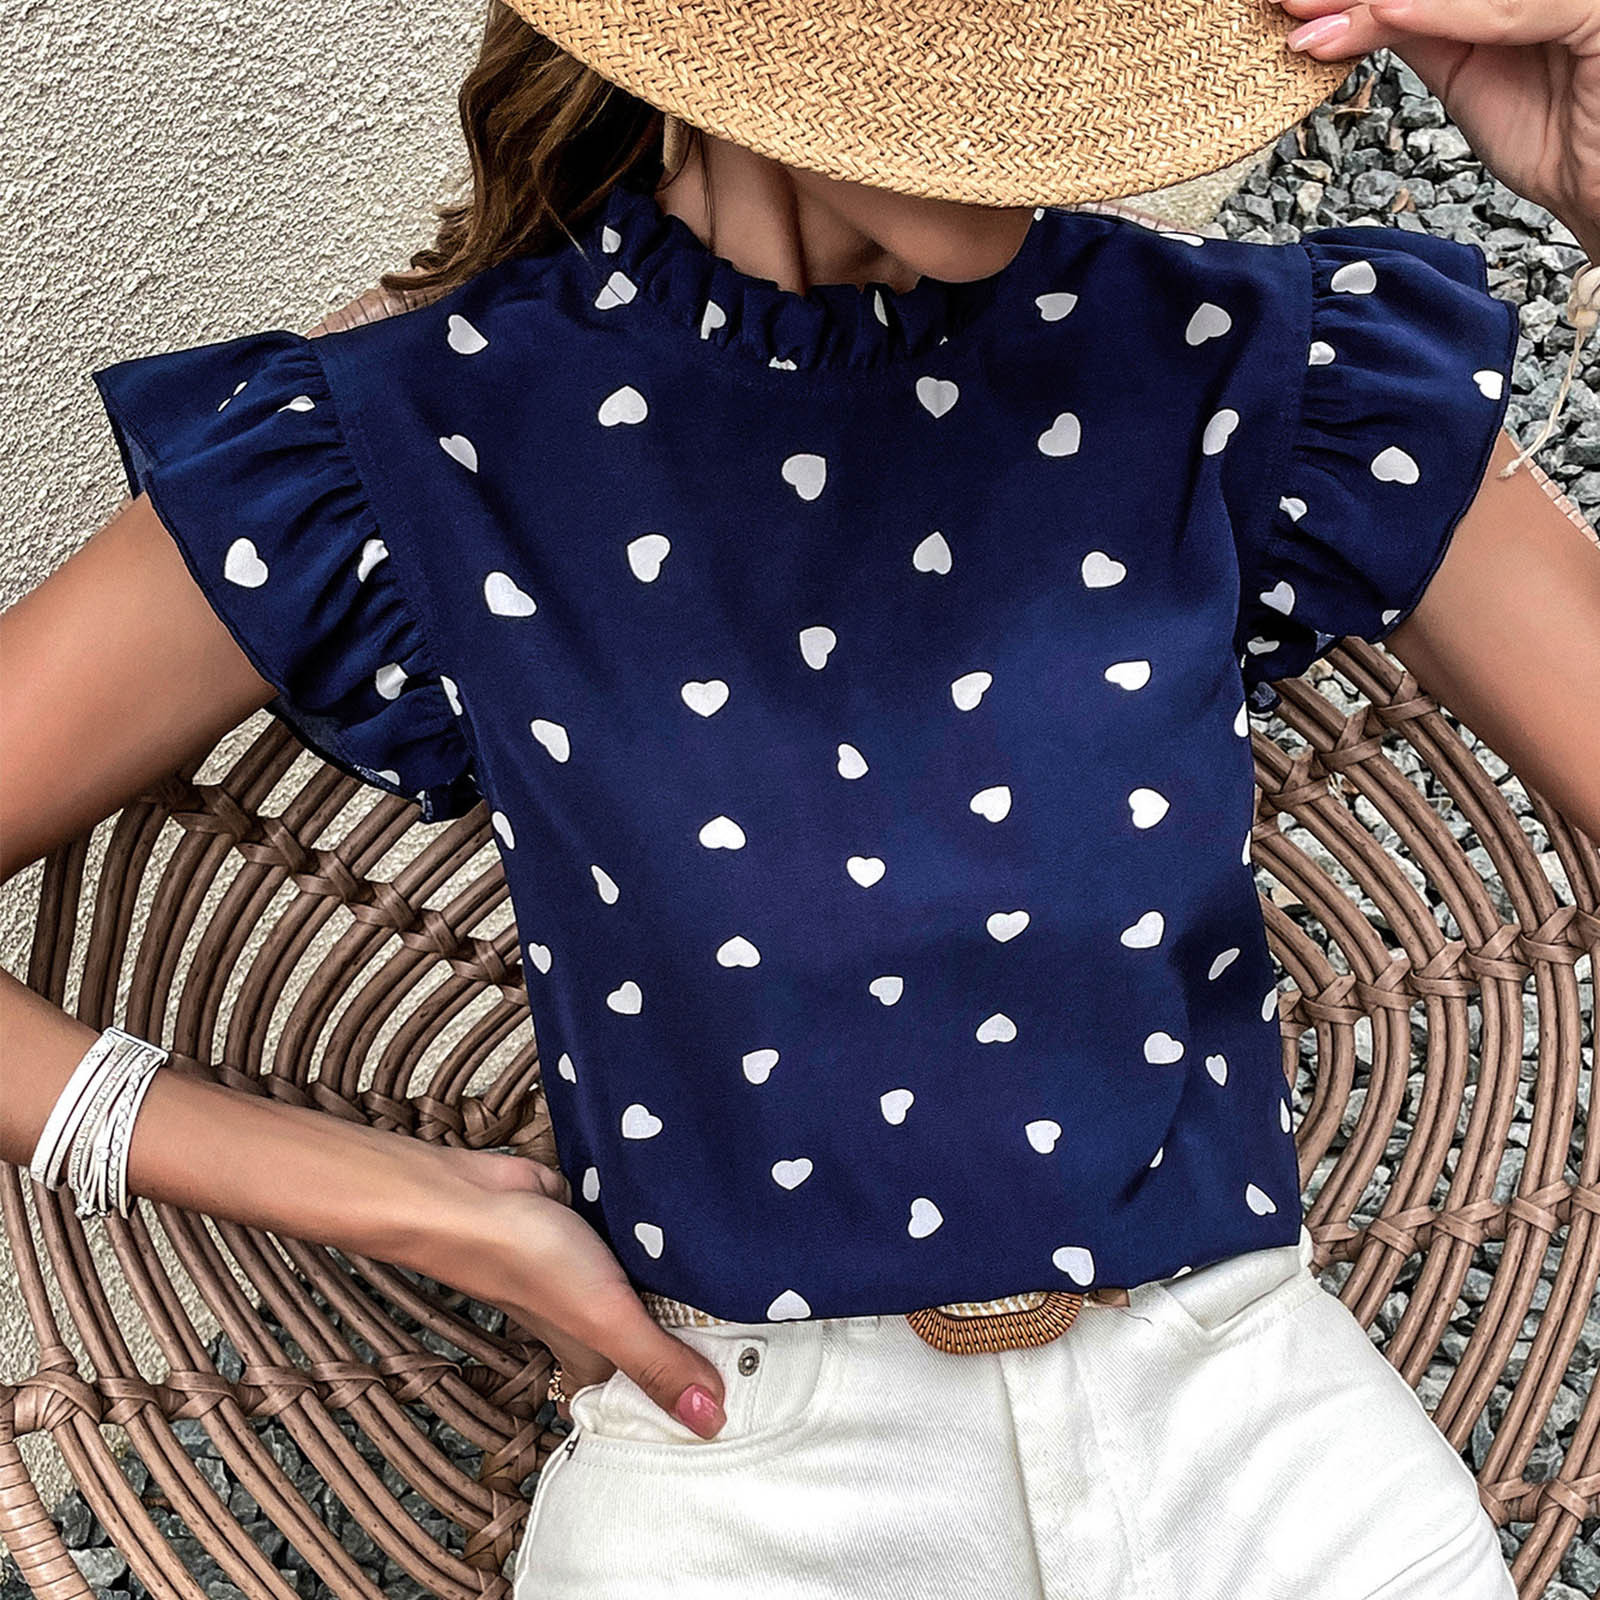 TAIAOJING Tshirt Women Summer Casual Short Sleeve Summer Pleated Polka Dot Round Neck Loose Top Fall T-Shirt - image 5 of 9